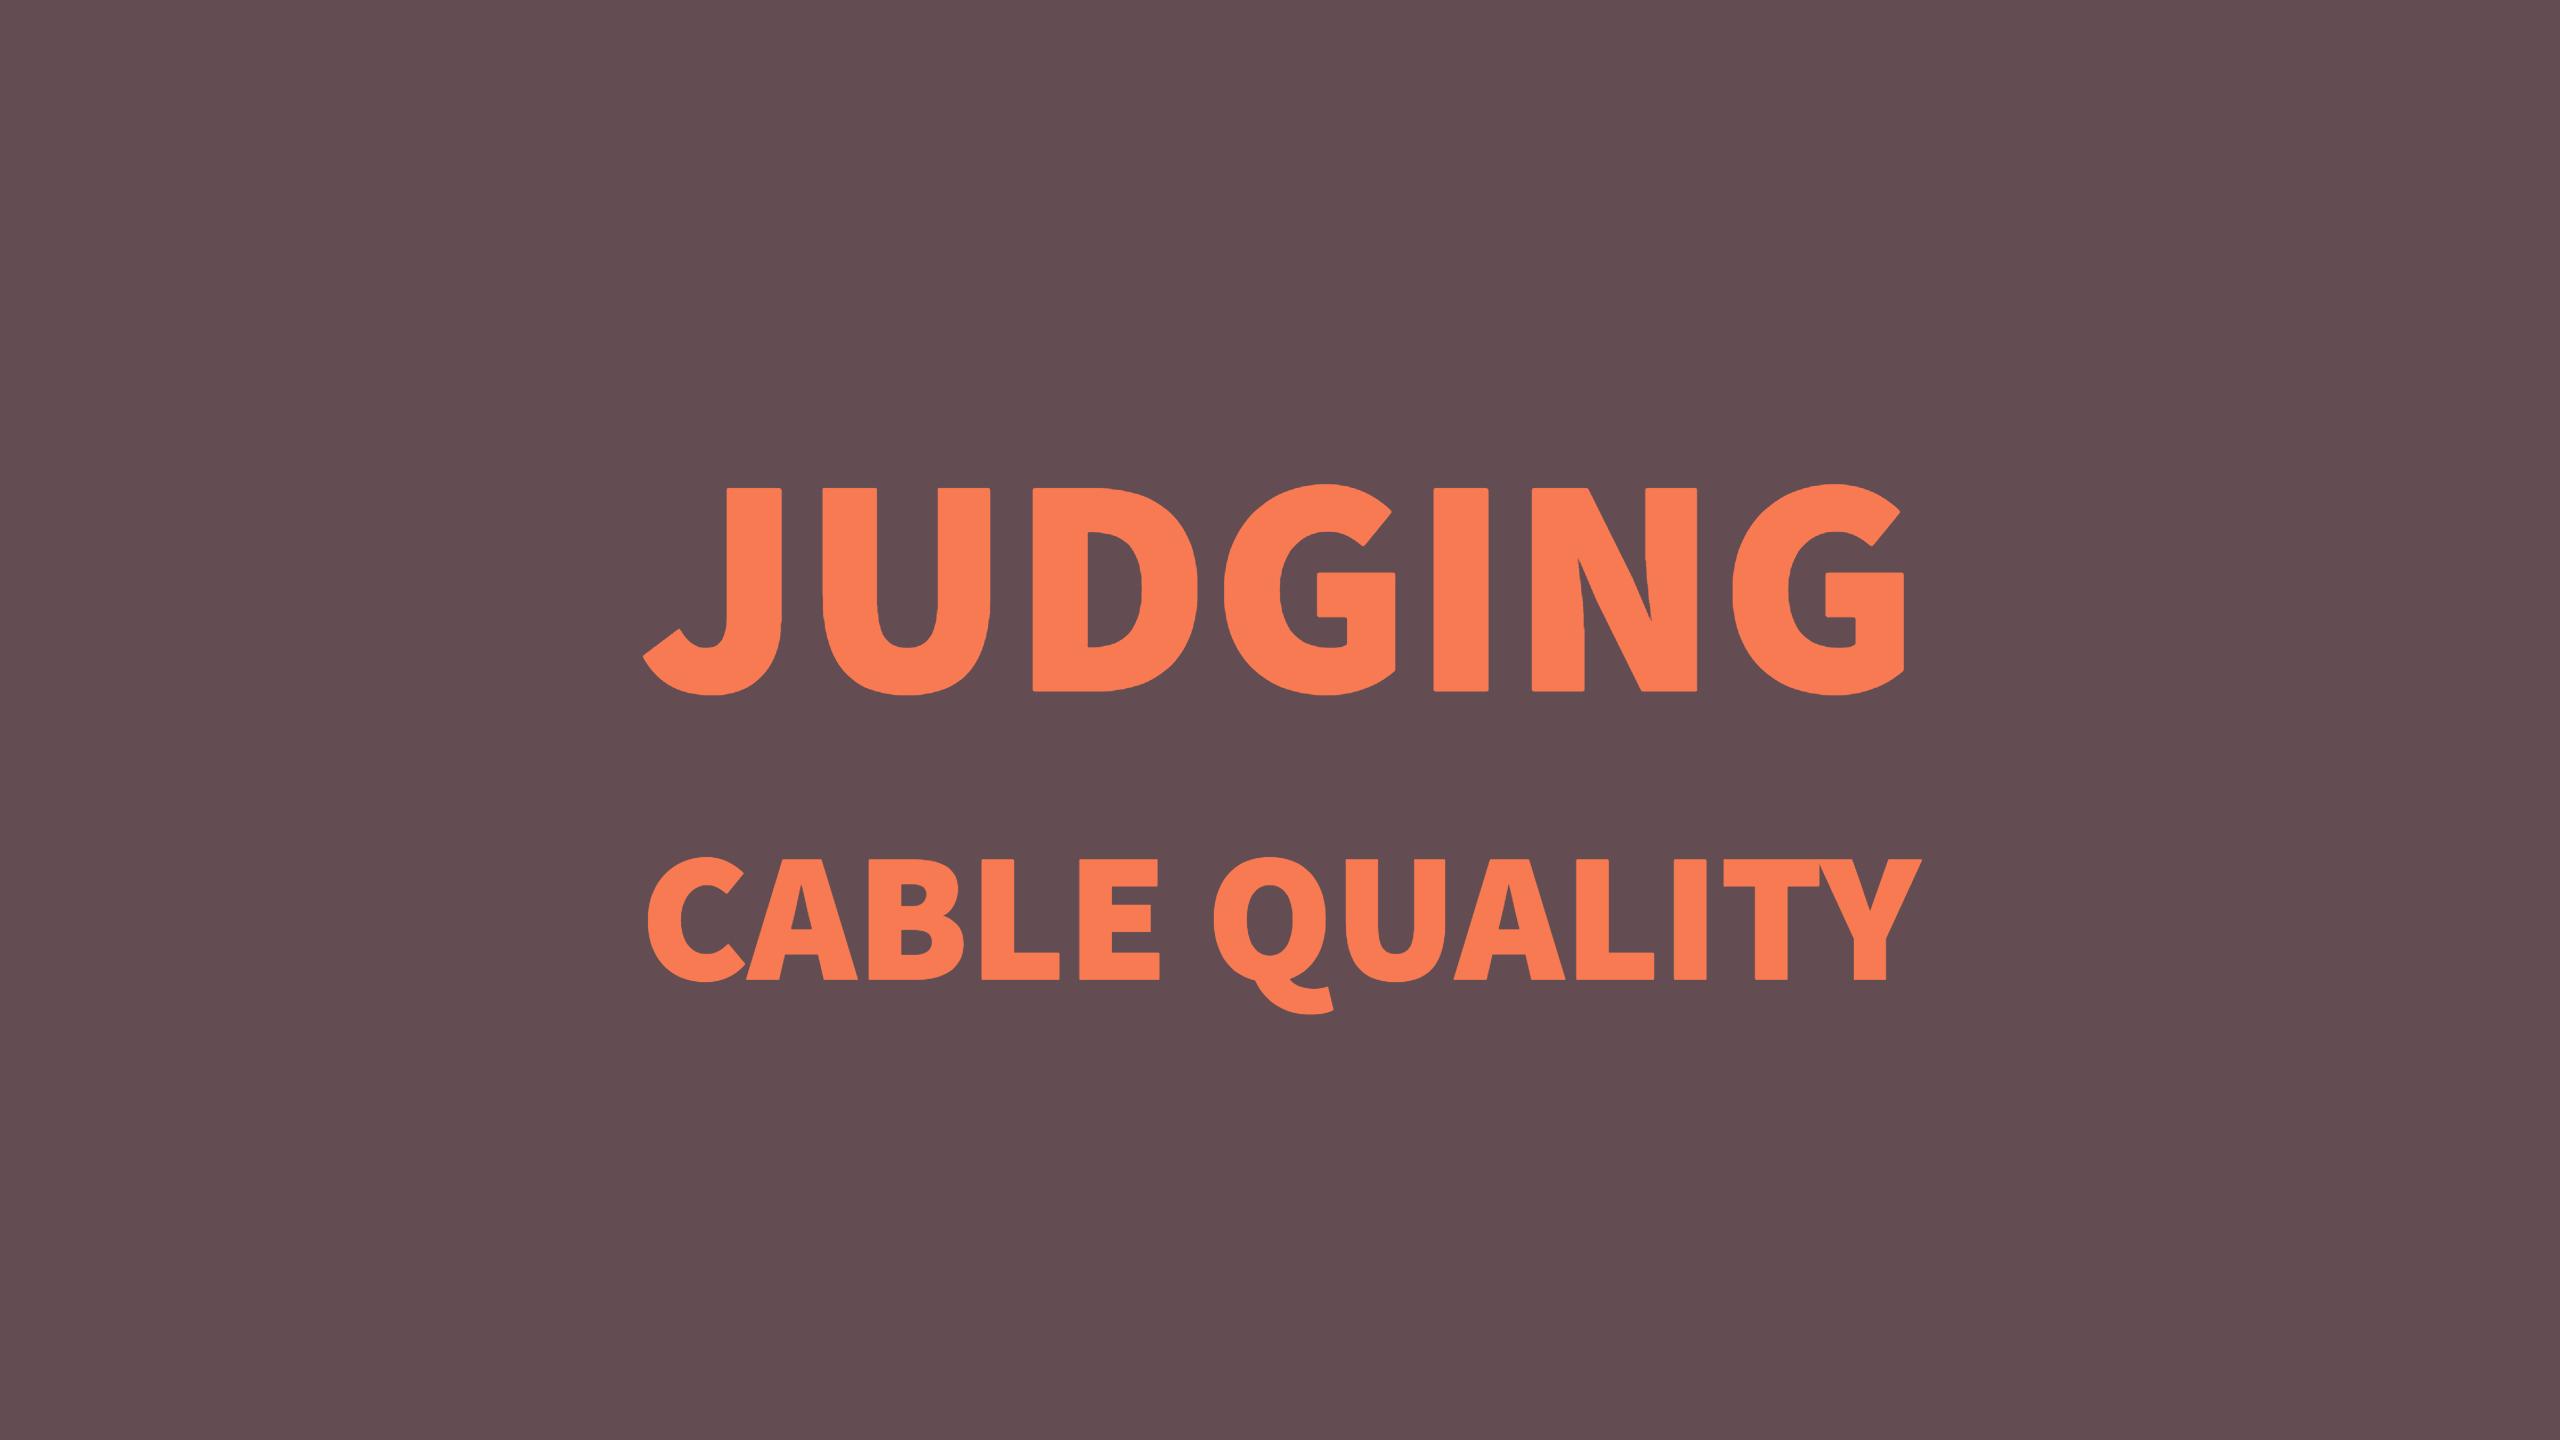 Judging cable quality